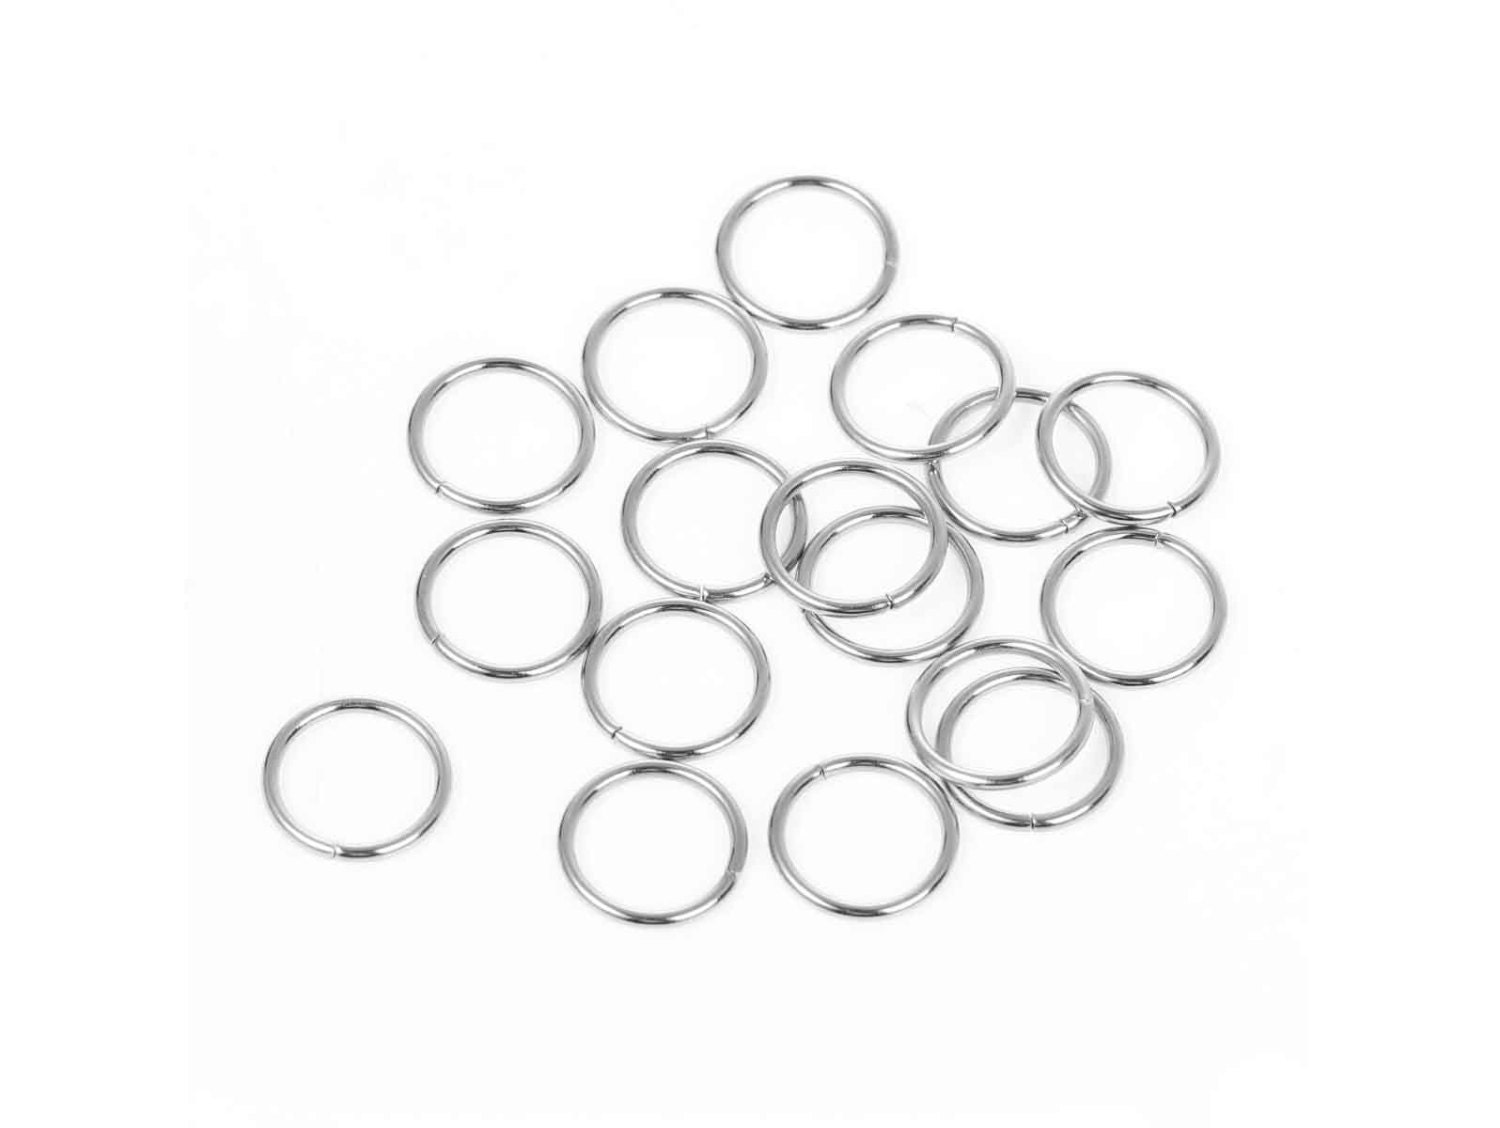 High quality 8mmOD x 1.5mm/10mmOD x 2mm BLACK Stainless Steel Saw-Cut Jump  Rings